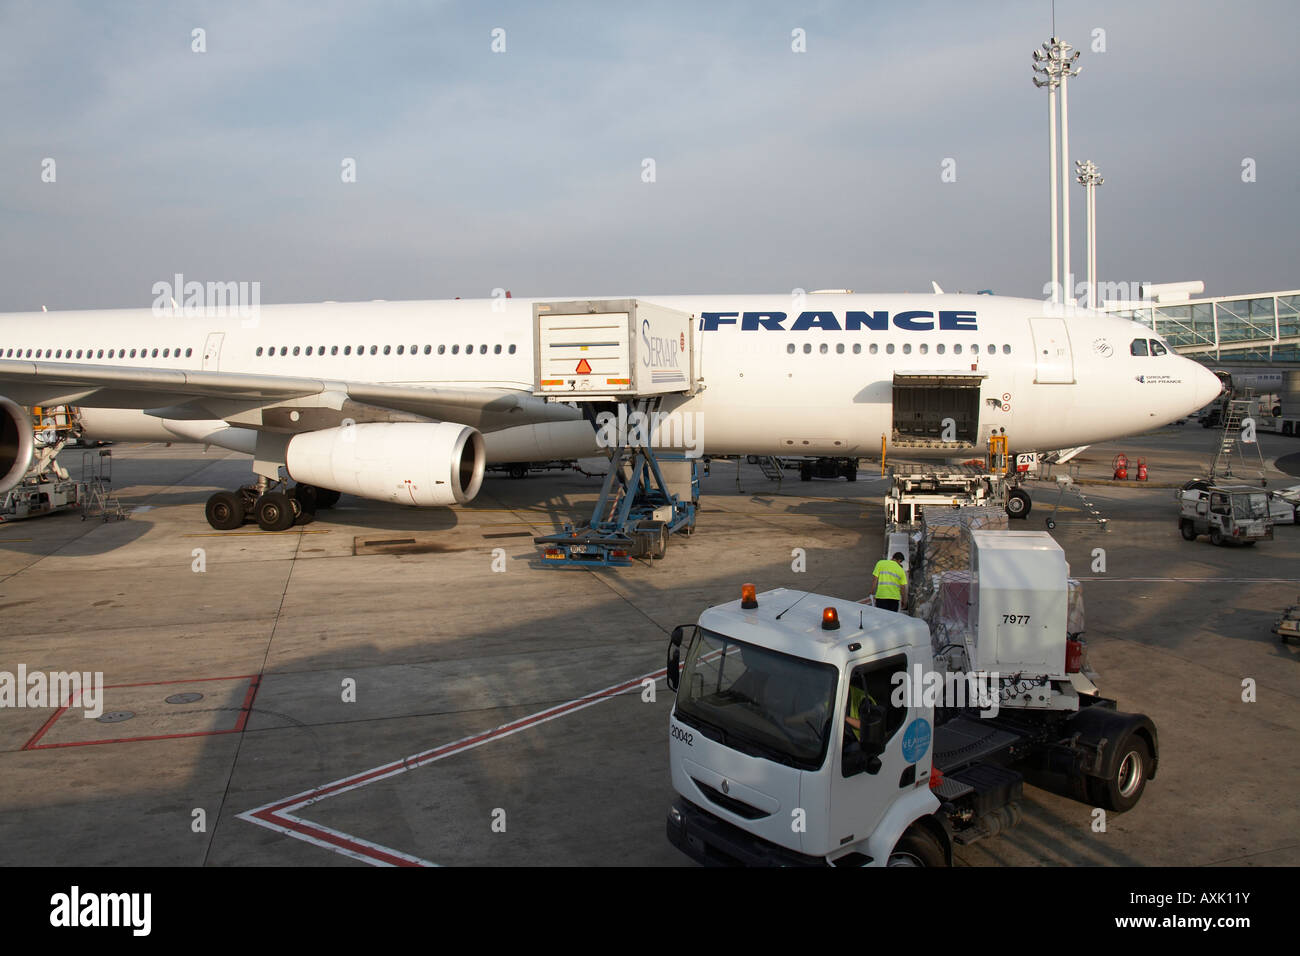 Air France aircraft on stand with jetty and ground servicing at Charles De Gaulle International Airport Paris France Stock Photo